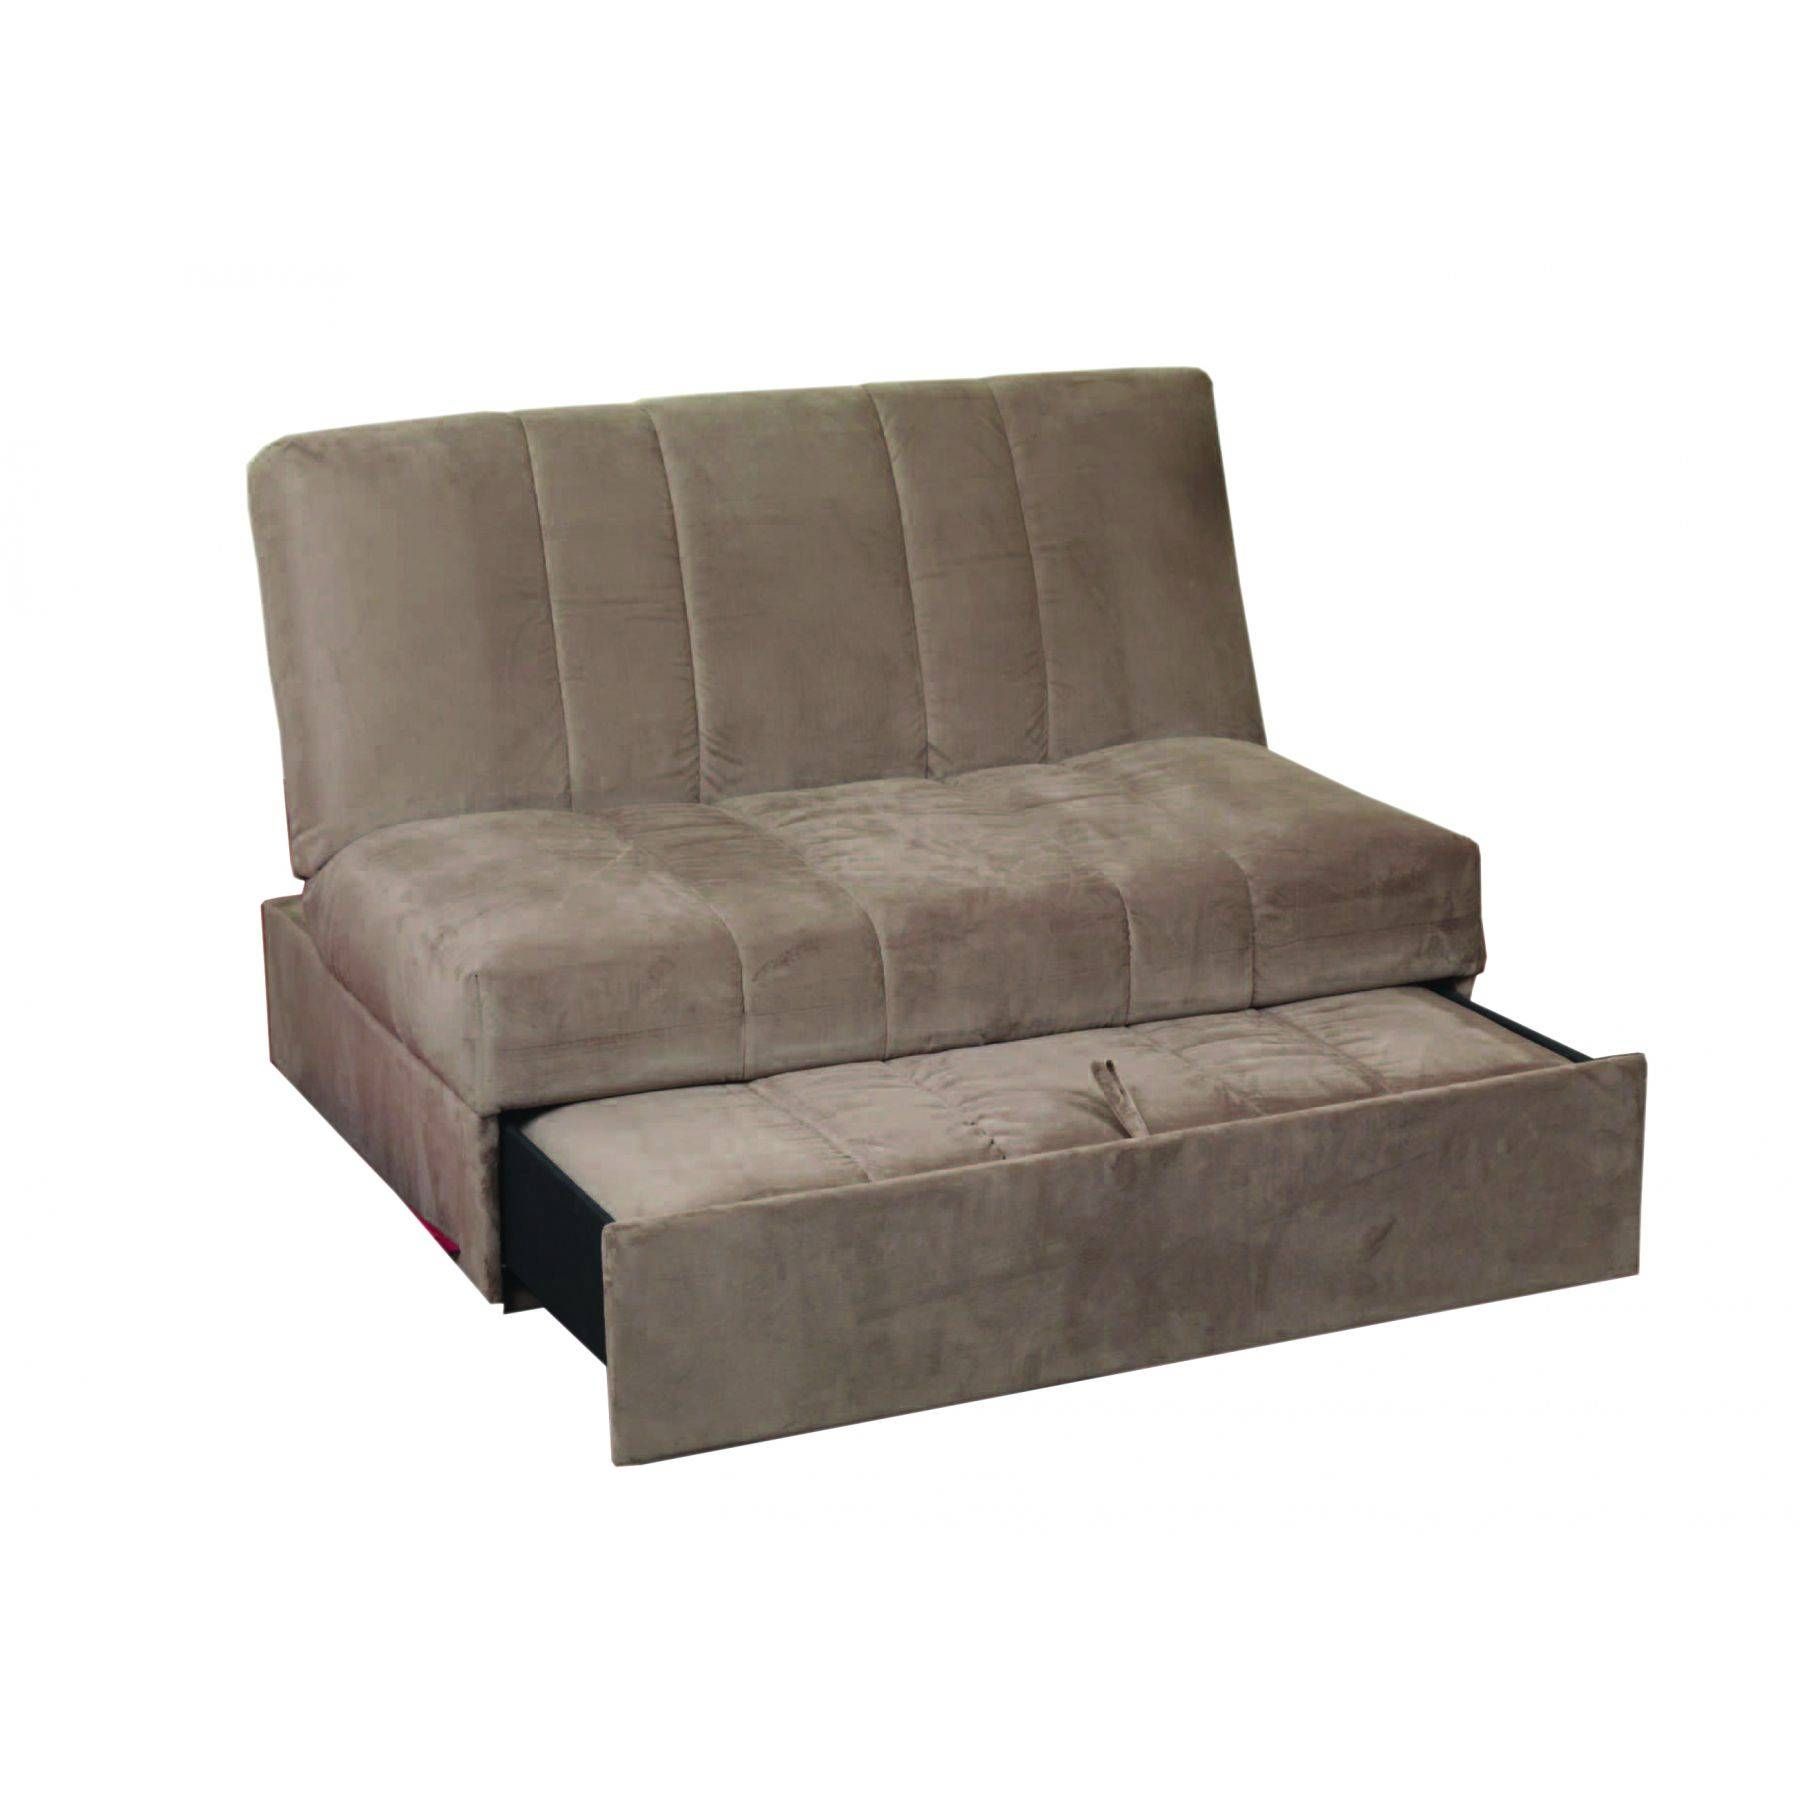 2 Seater Sofa Bed | Teabiz Within Small 2 Seater Sofas (Photo 23 of 30)